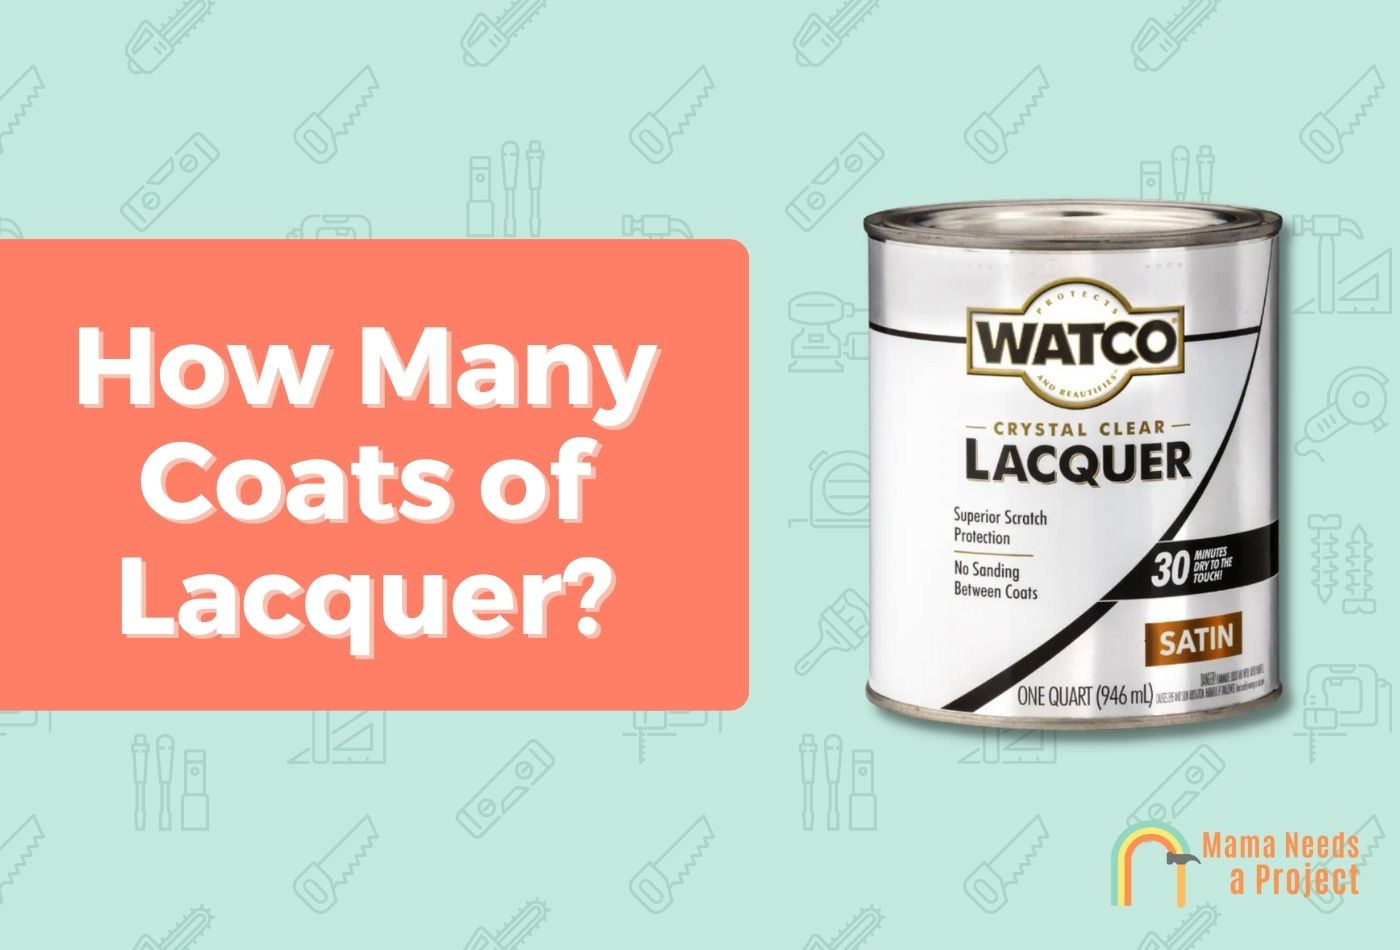 How Many Coats of Lacquer?